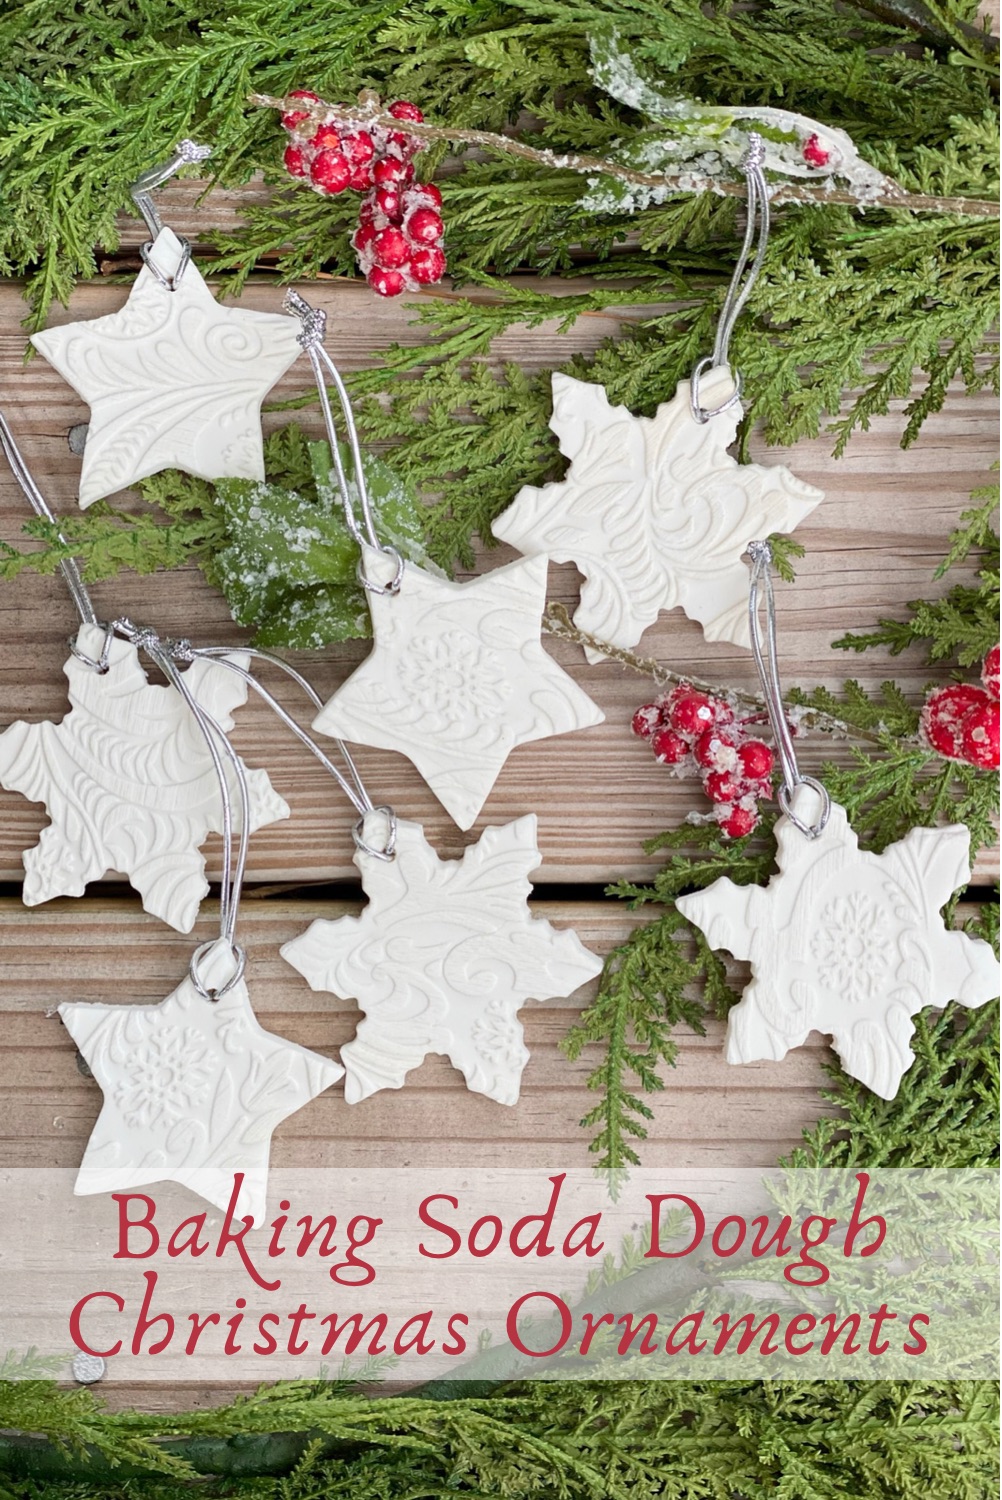 Baking soda dough ornaments laid out on a wood table with Christmas greenery and red berries around them.